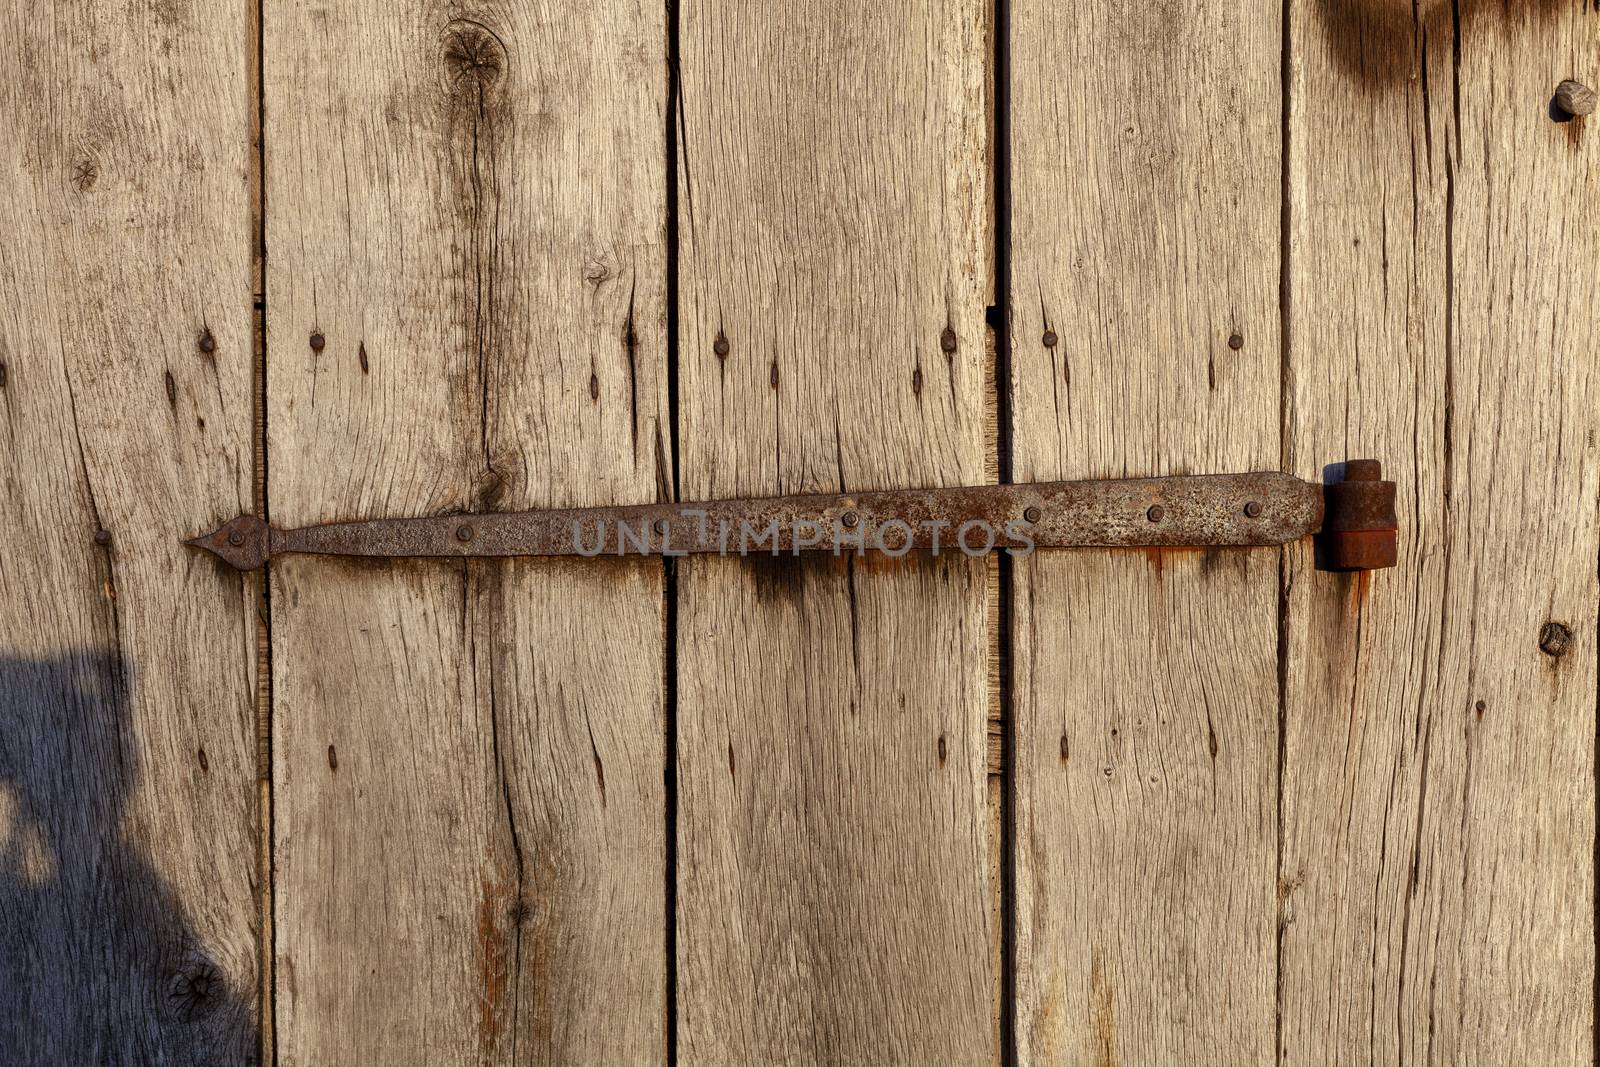 Old Wooden Double door with iron handles and hinges